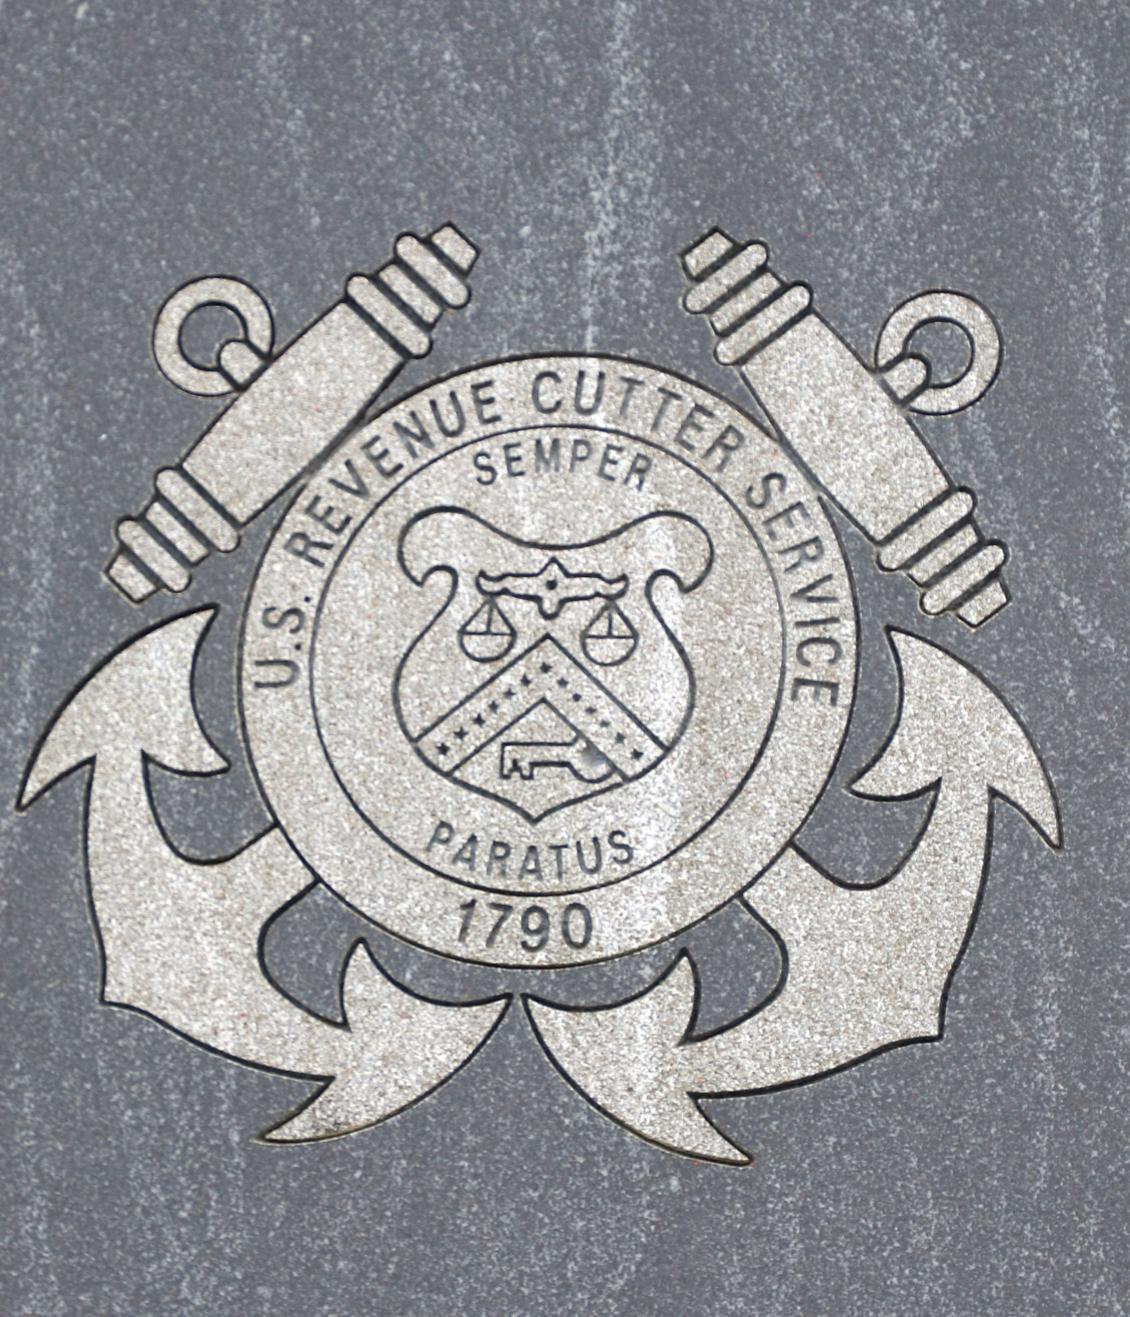 Cape May Training Center - Eternal Flame Coast Guard Services Monument - Cutter Services